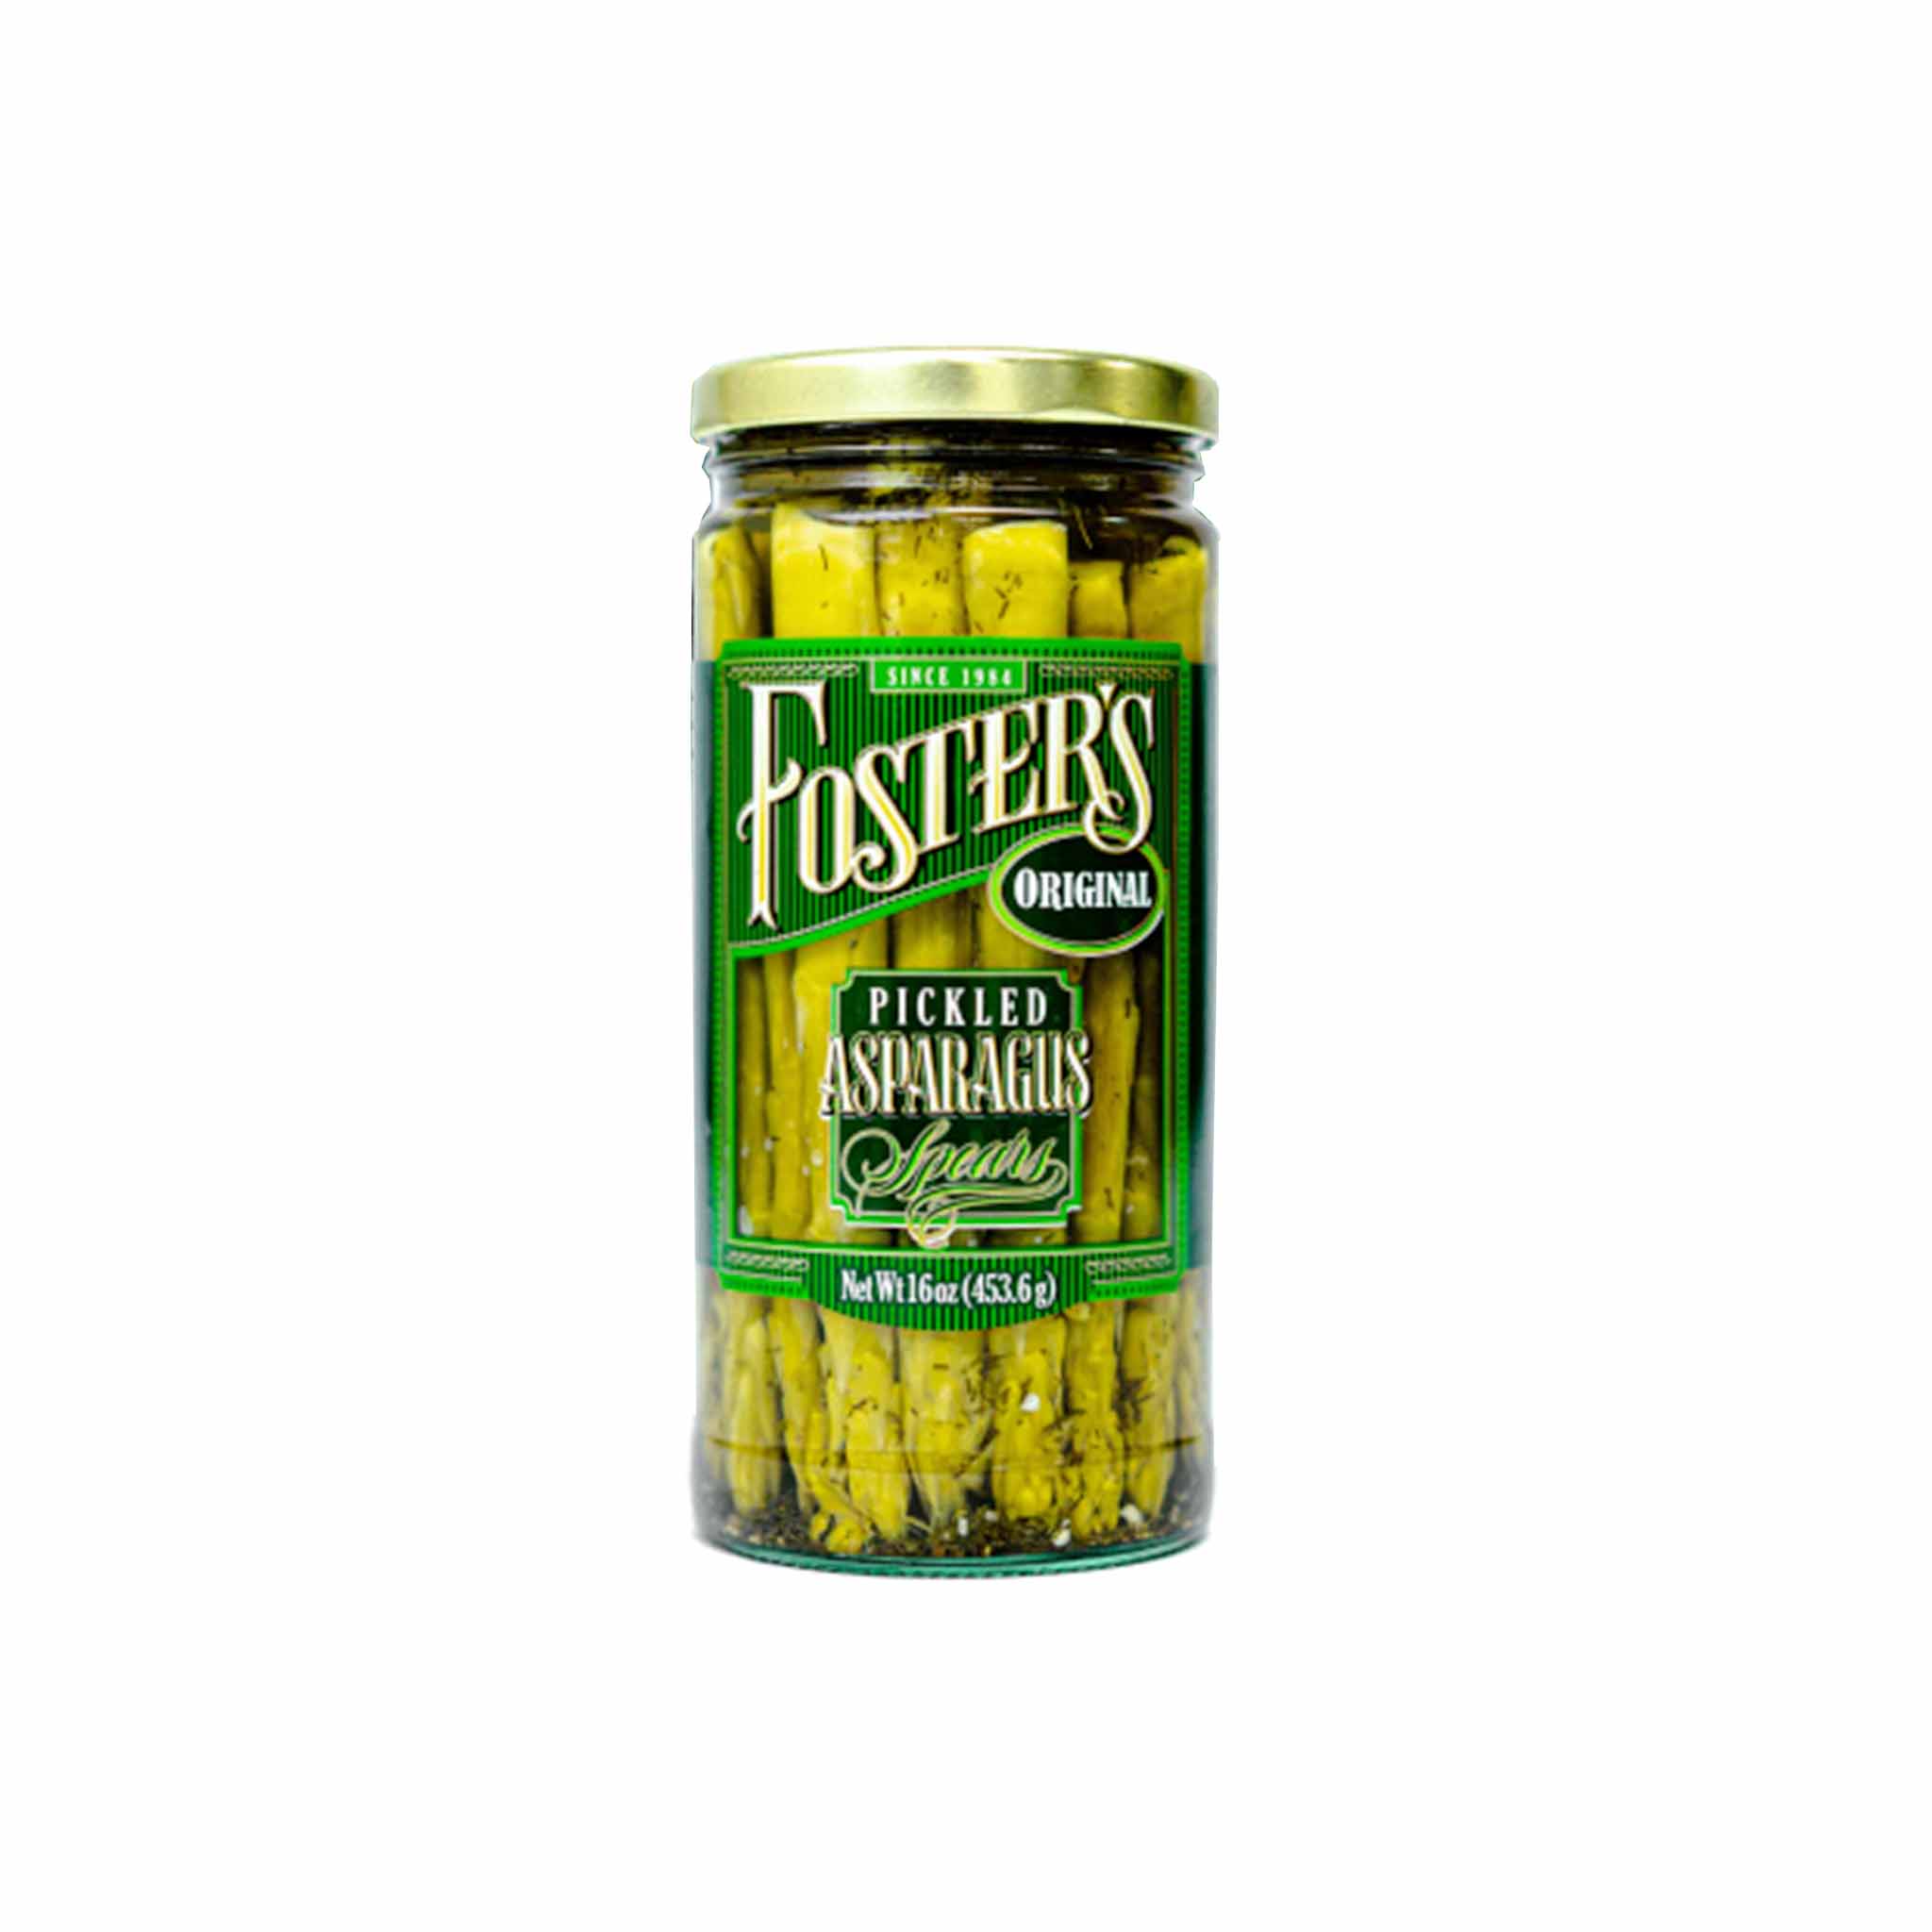 FOSTERS PICKLED ASPARAGUS 16oz